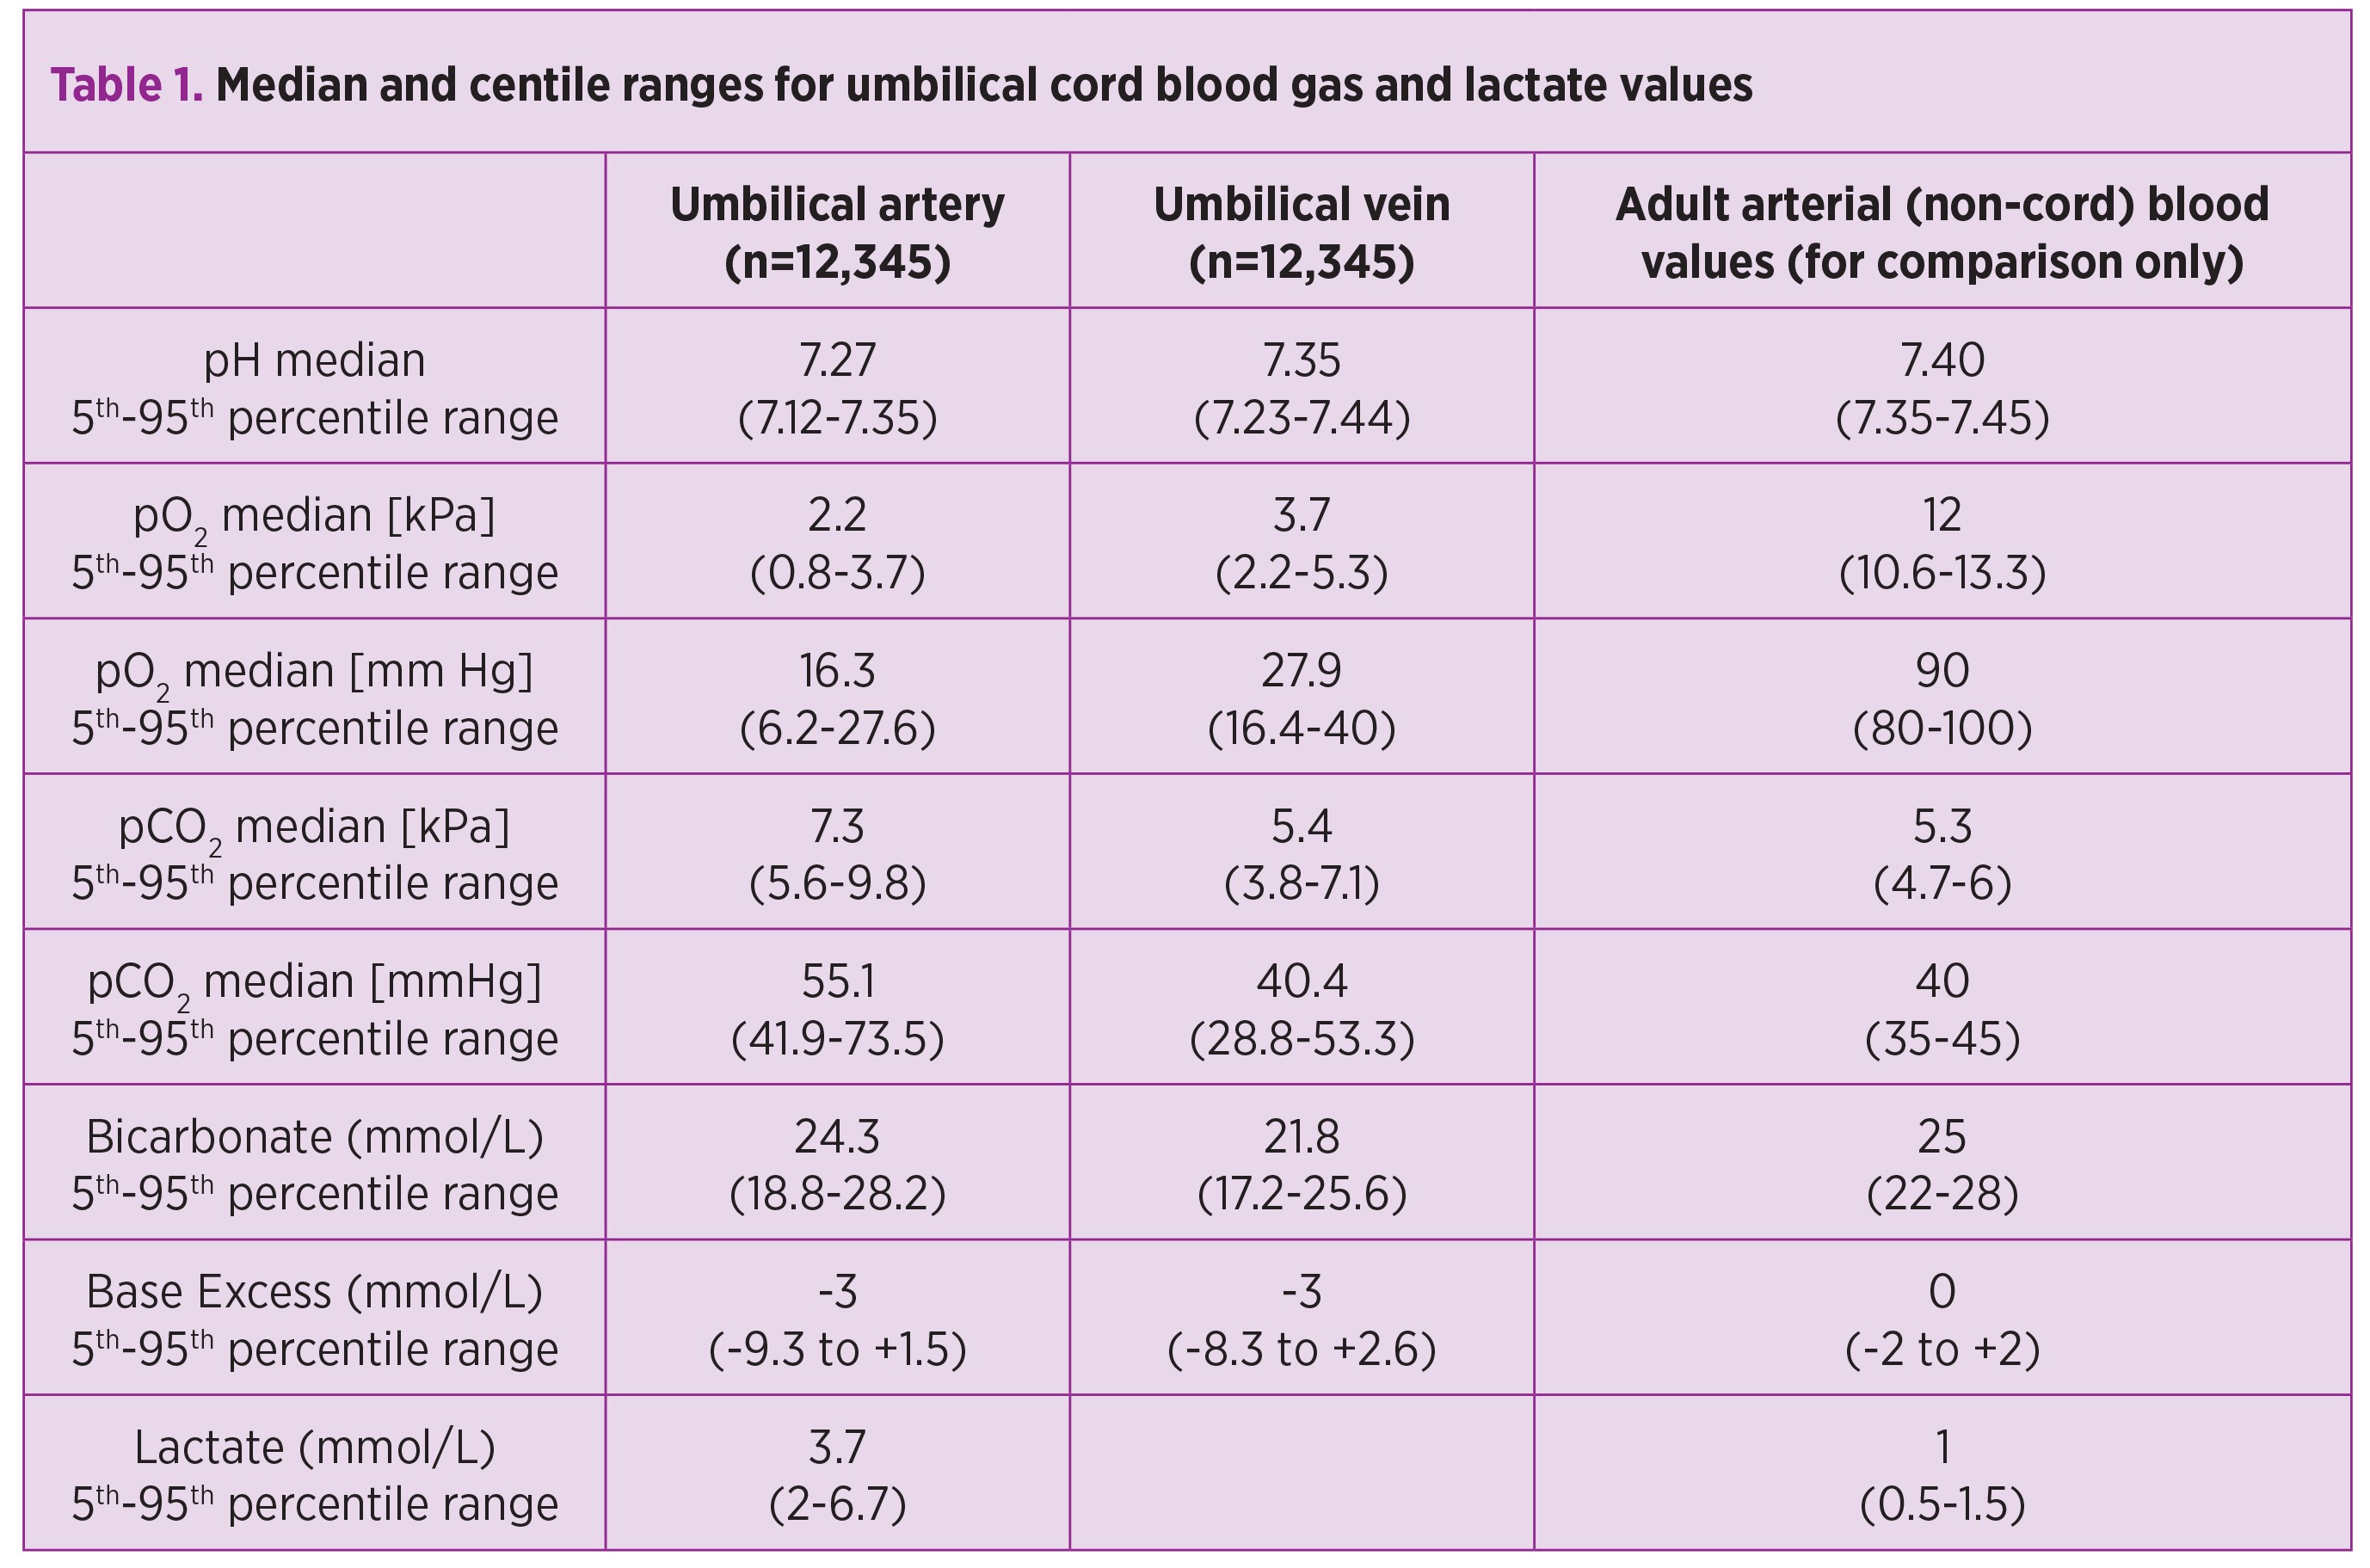 Table 1. Median and centile ranges for umbilical cord blood gas and lactate values